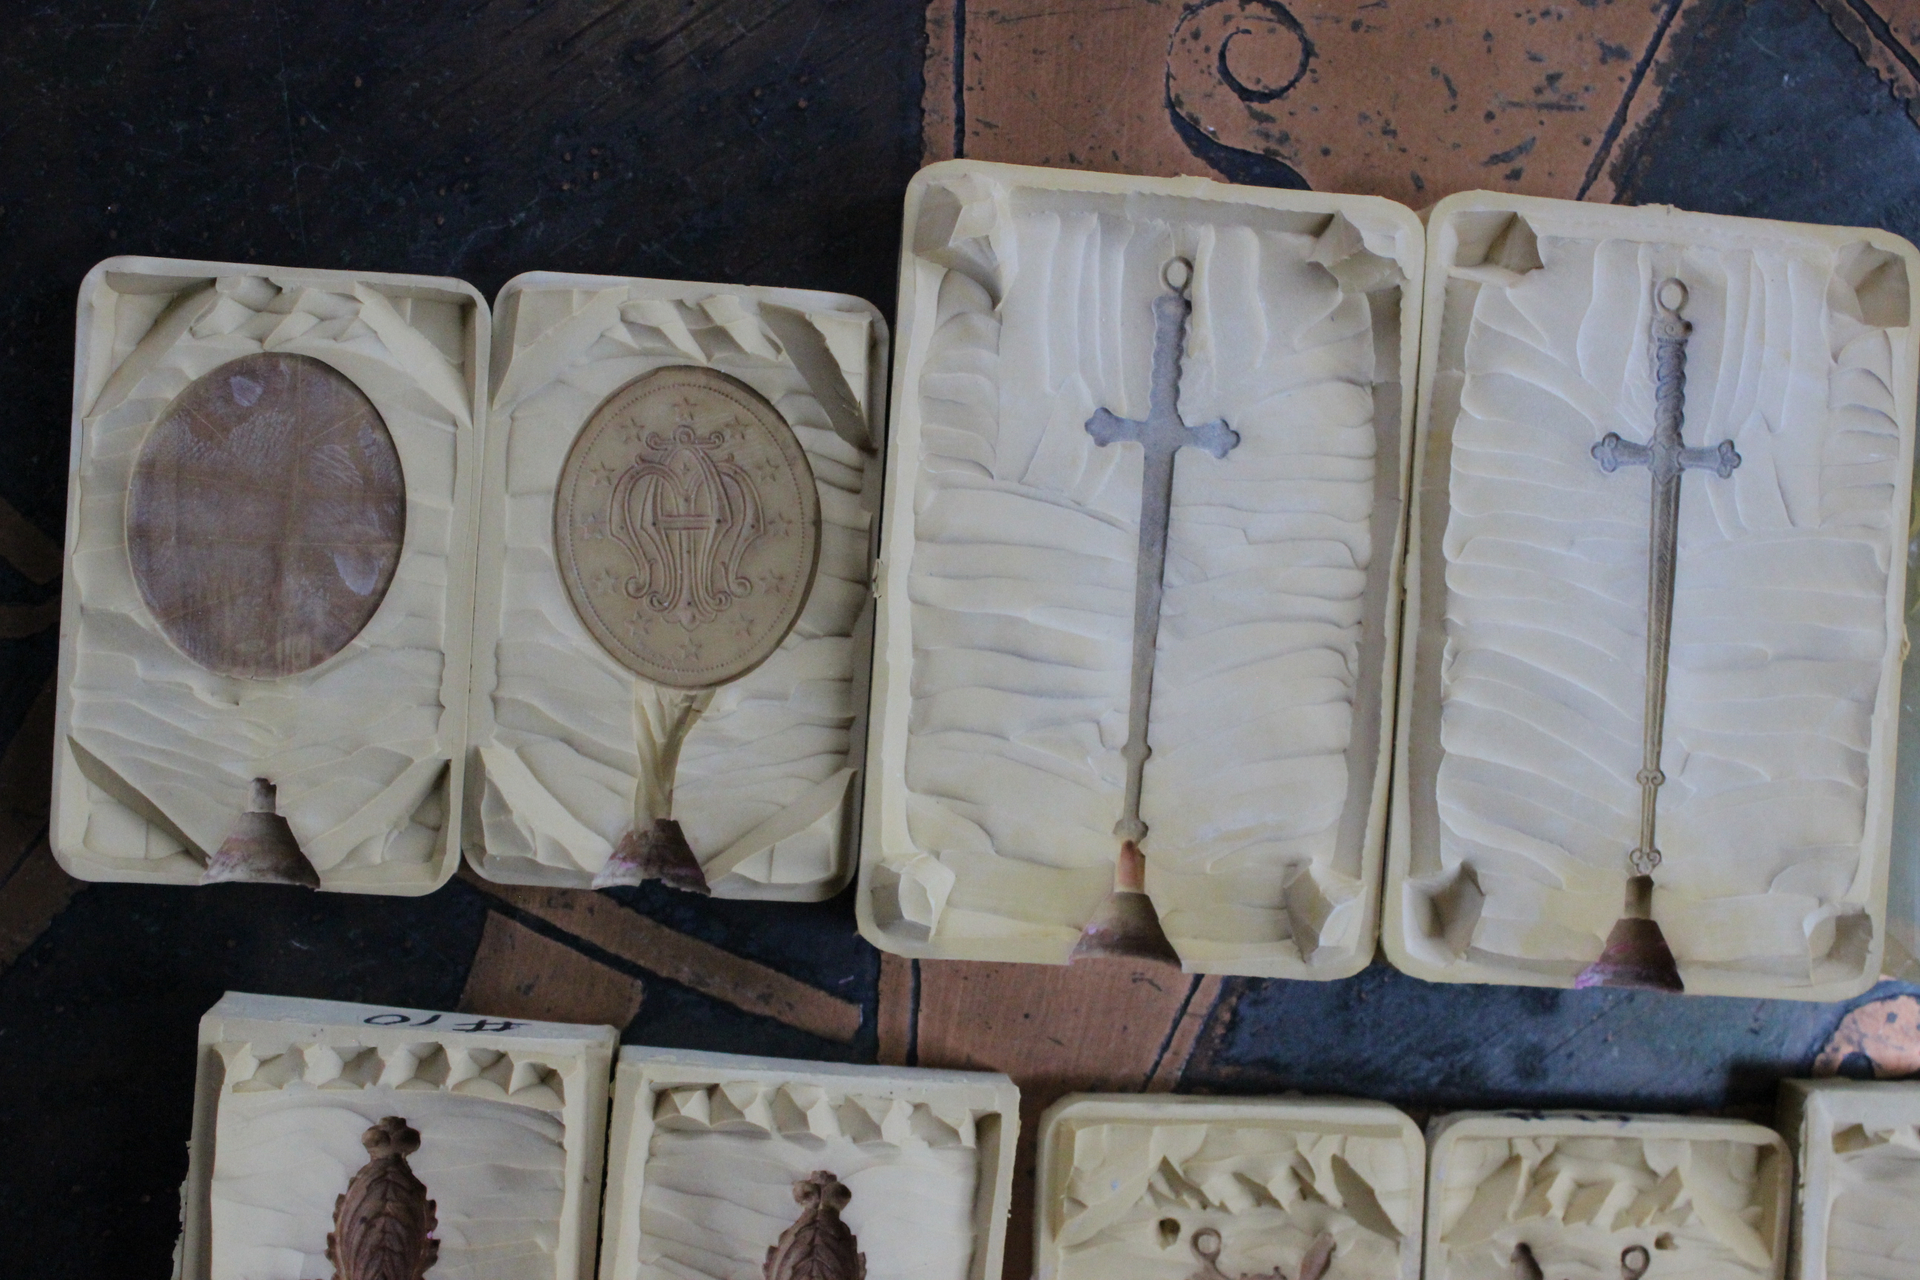 PRICE REDUCED! Rare Collection of 19 Lost Wax Cast Molds - all from Antique Medals,Cross,Fleur de Lis and Swords -make your own One of a Kind Jewelry Pieces!